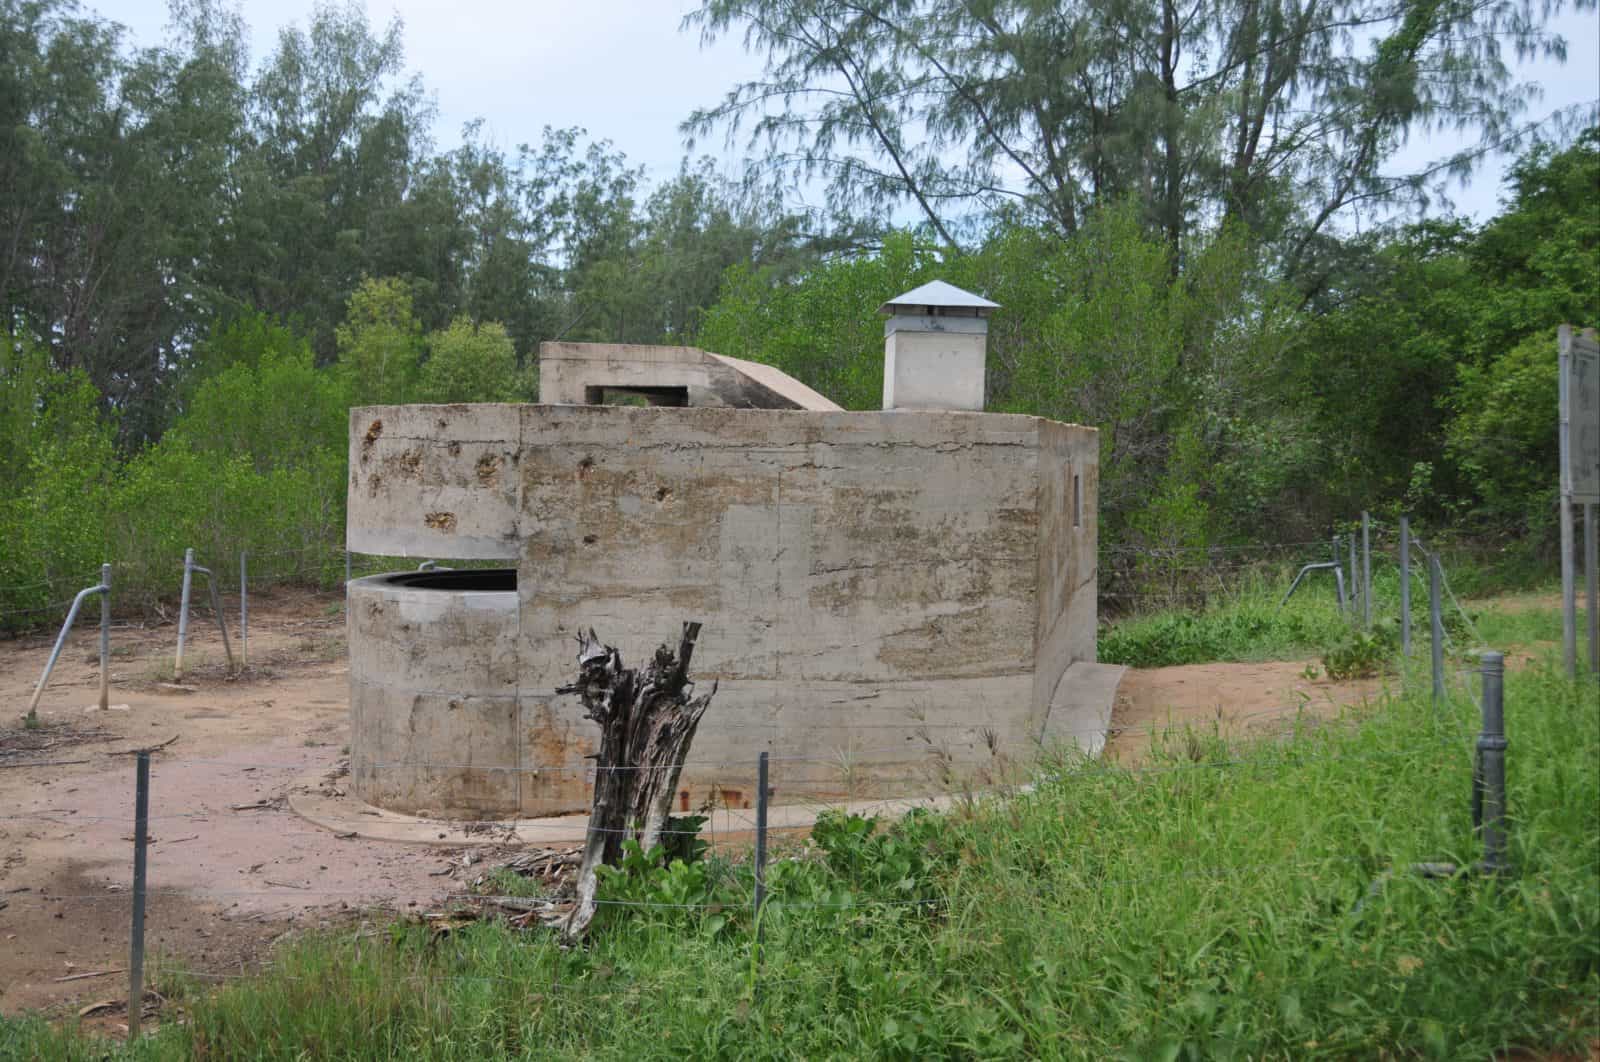 Singapore Pattern observation posts following conservation works in 2005.